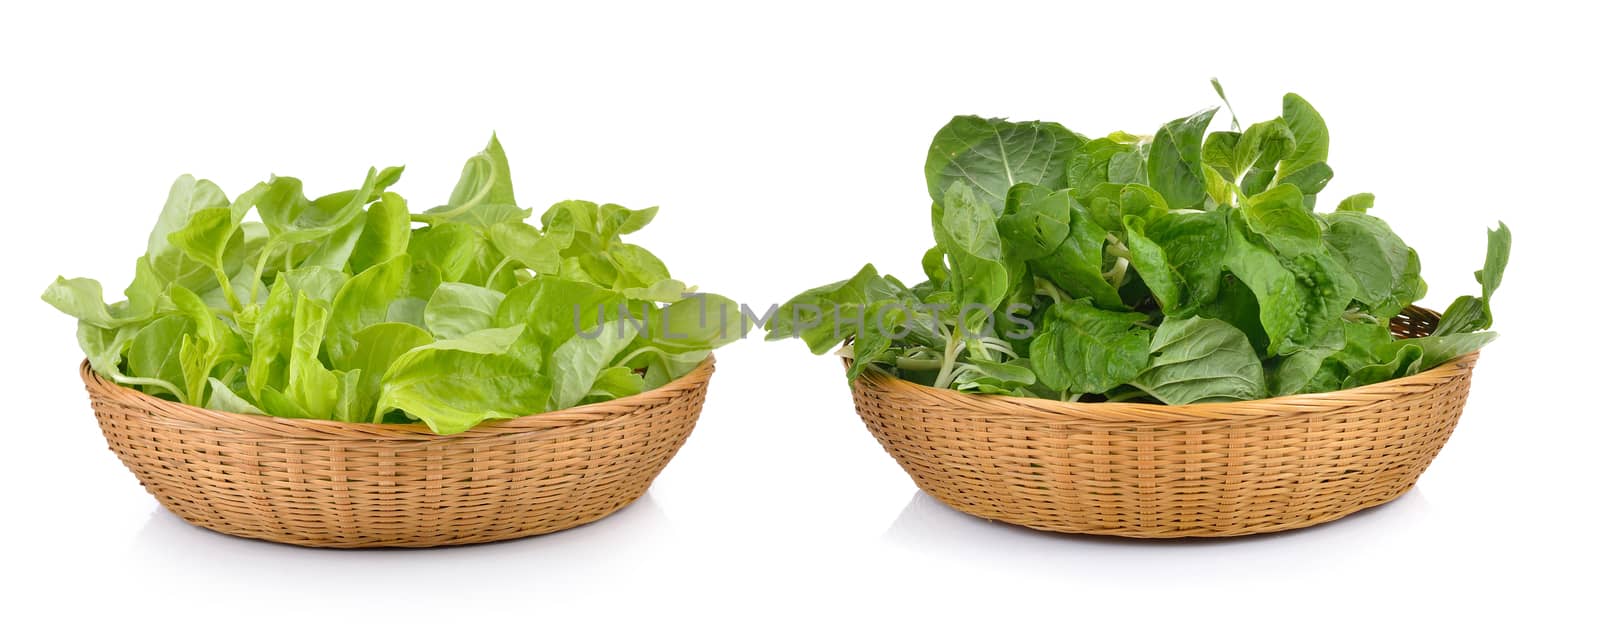 spinach in the basket on white background by sommai